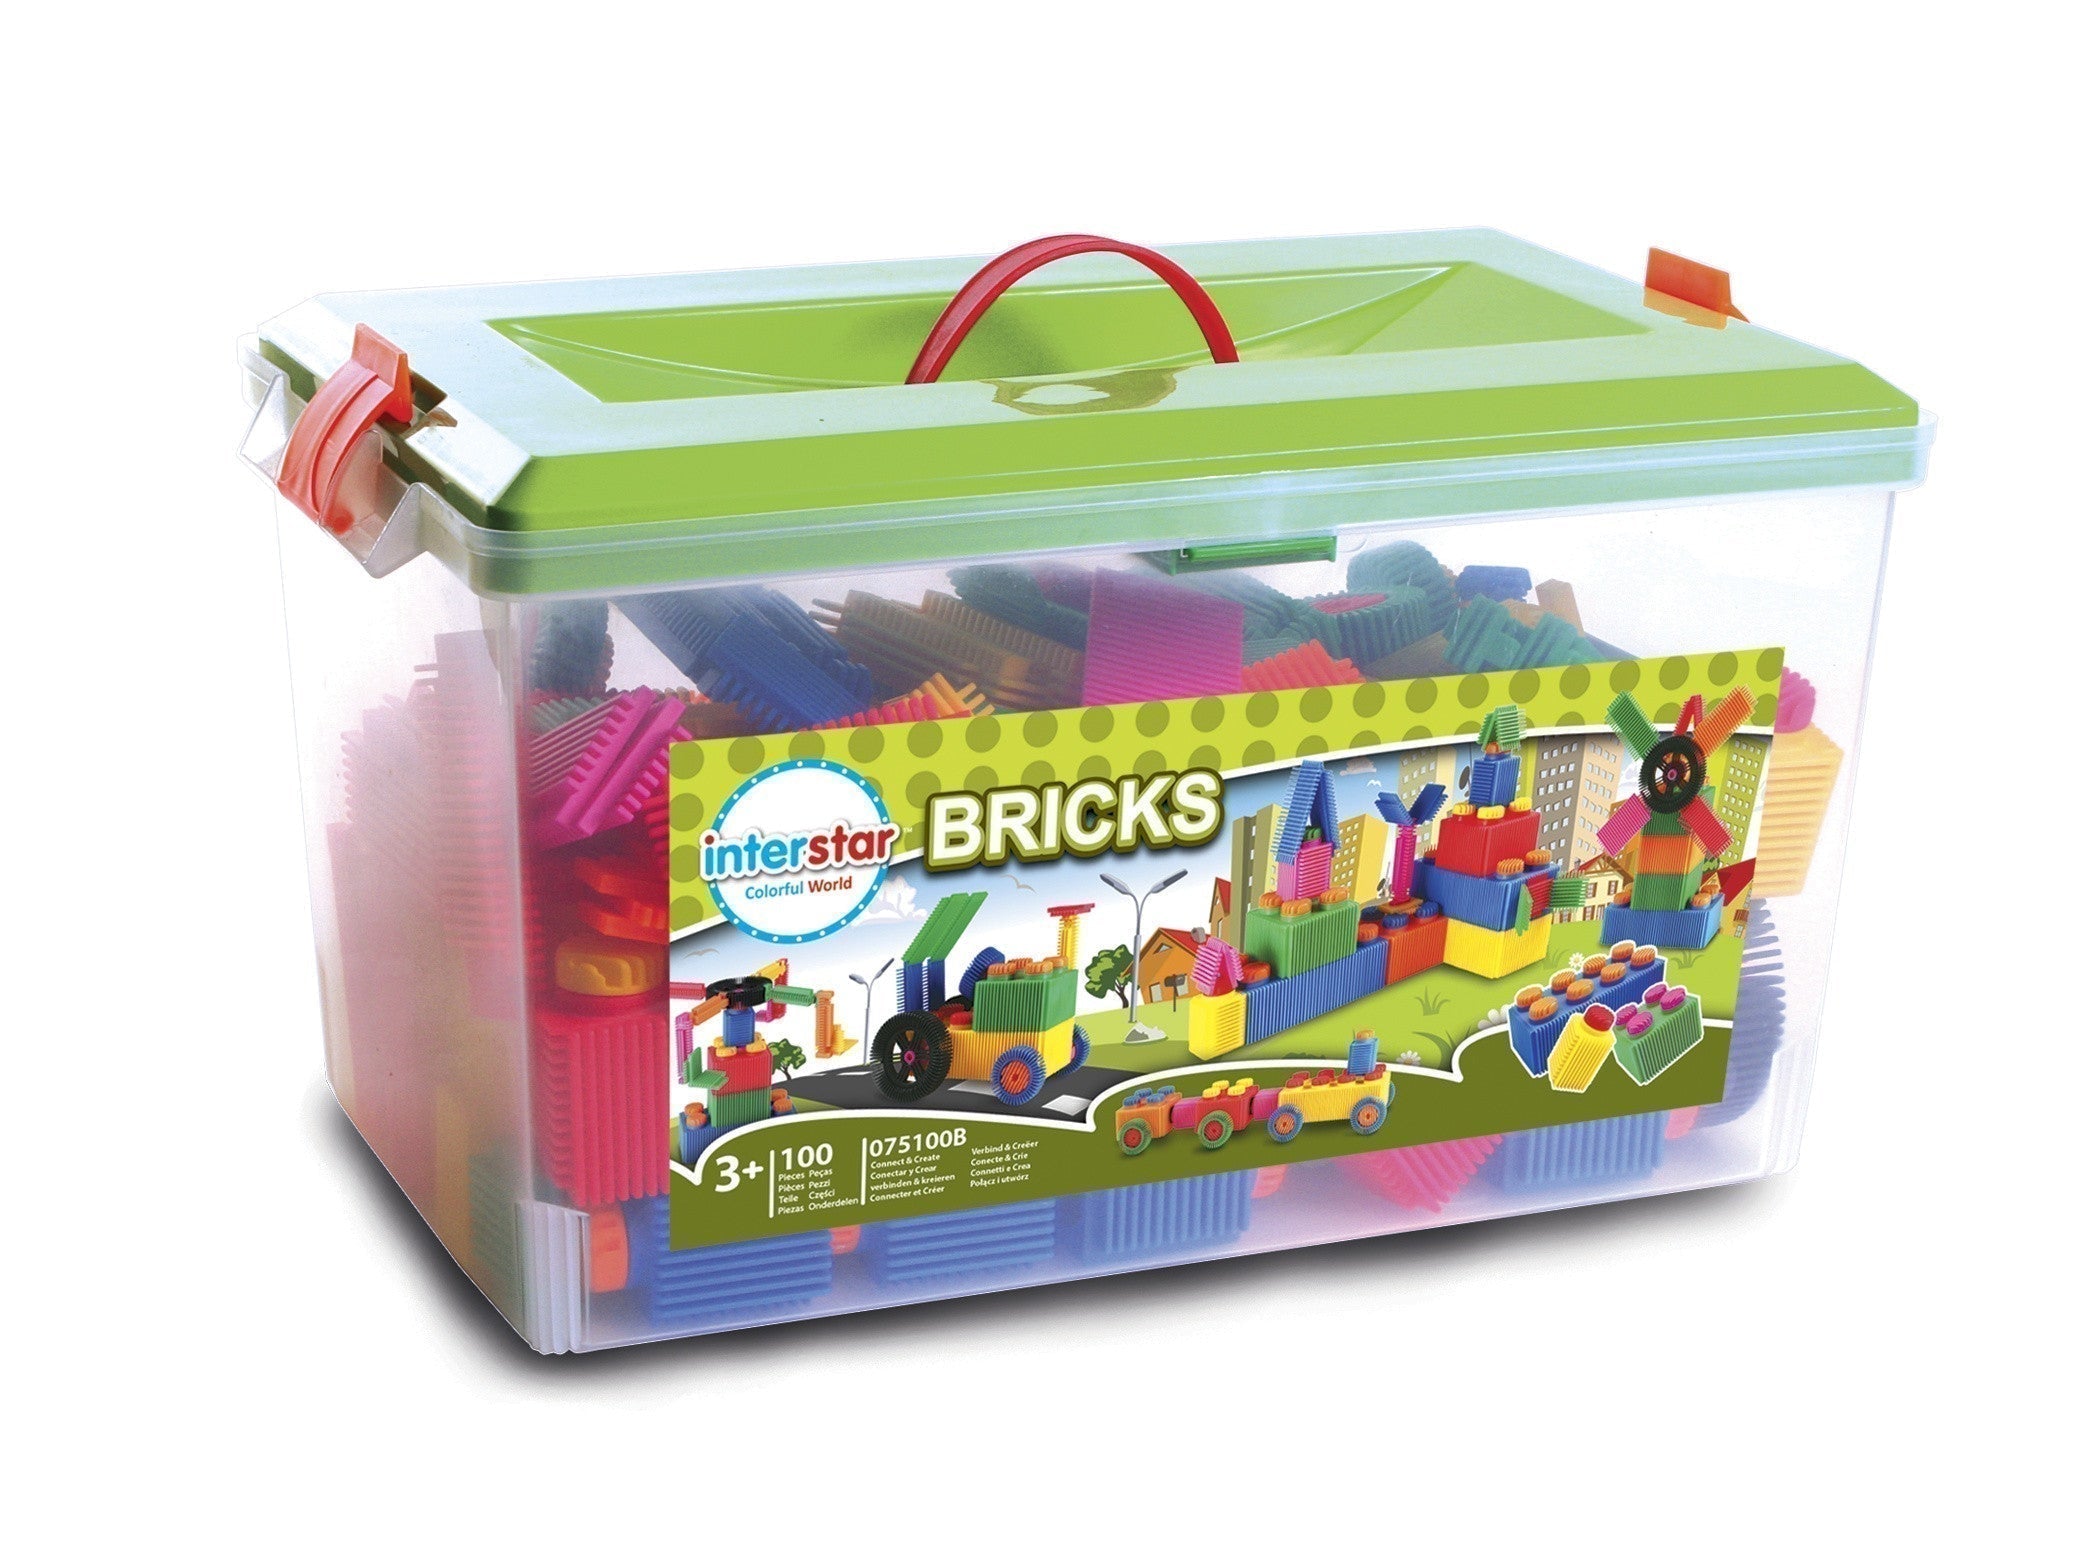 Interstar Bricks 100 Pieces, There are bricks, and then there are Interstar Bricks! These ingenious, vibrantly coloured linking shapes are tactile and easy for little hands to hold and connect. The Interstar Bricks 100 Pieces provide endless building opportunities which will challenge even the brightest of minds and will provide toddlers with lots of educational, sensory fun! With amazing potential and versatility, this set will activate the ability to visualise and then create. Each Interstar Set can also 